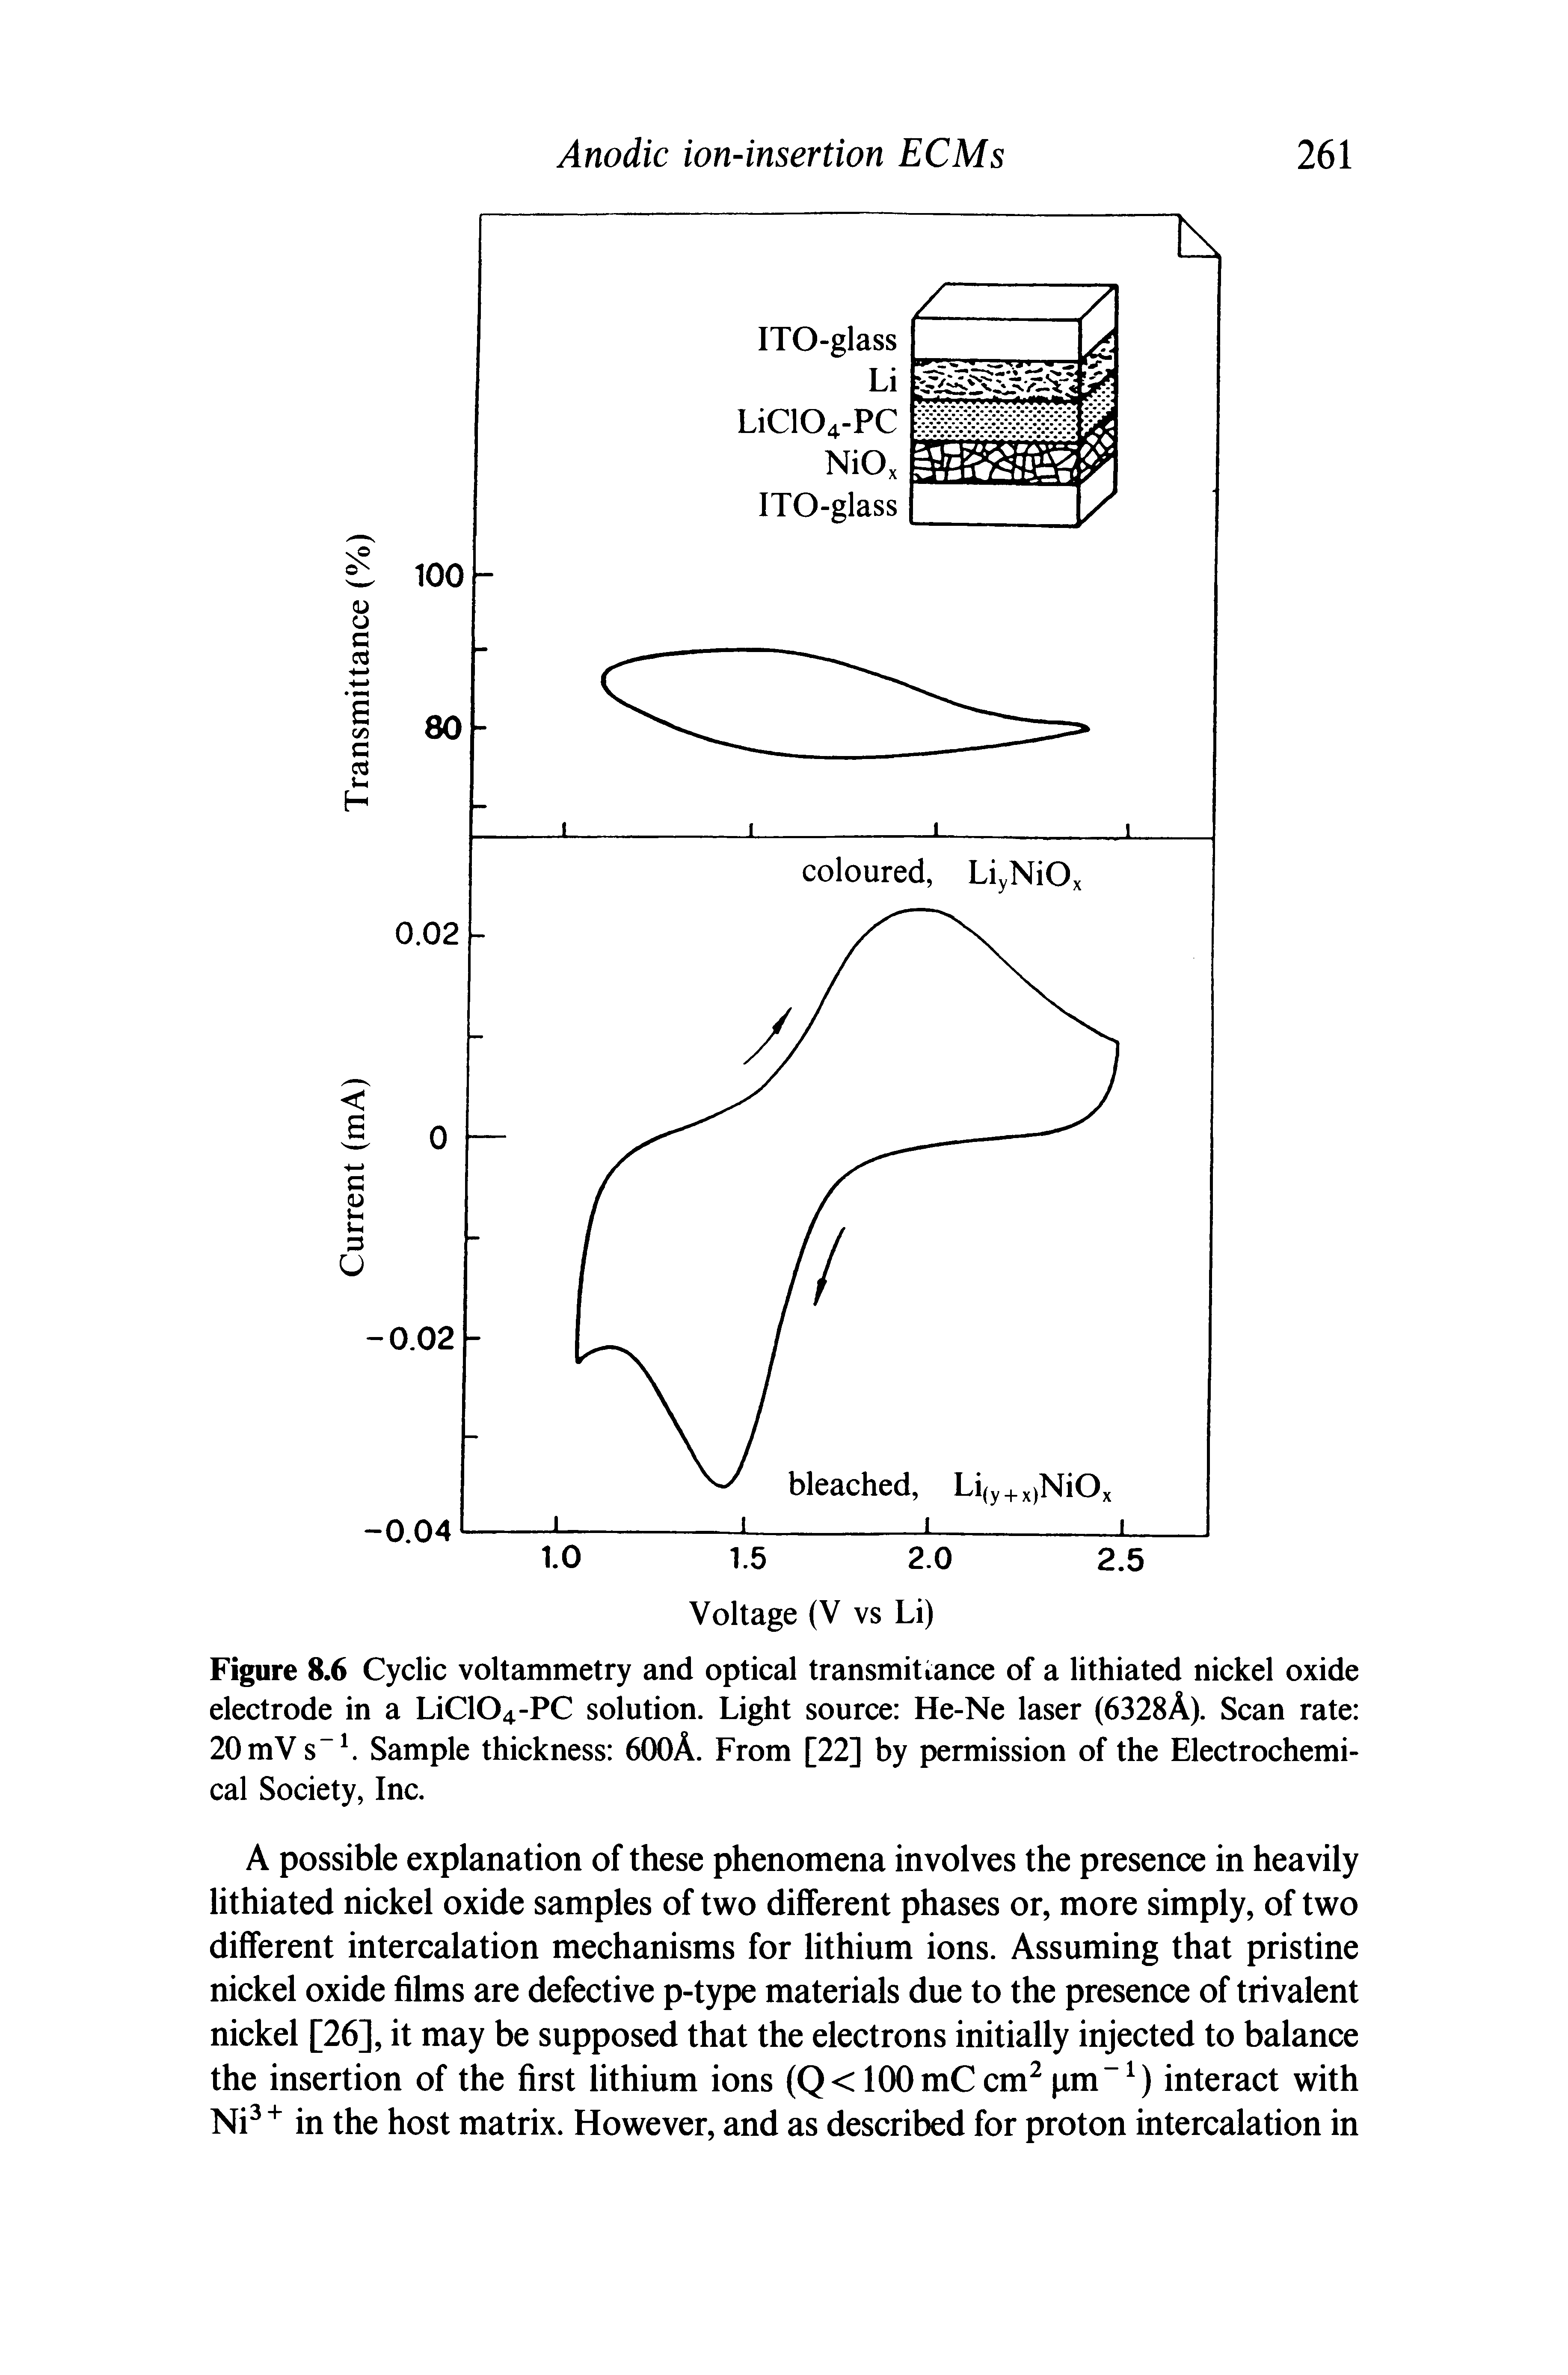 Figure 8.6 Cyclic voltammetry and optical transmittance of a lithiated nickel oxide electrode in a LiC104-PC solution. Light source He-Ne laser (6328A). Scan rate 20 mV s Sample thickness 6(X)A. From [22] by permission of the Electrochemical Society, Inc.